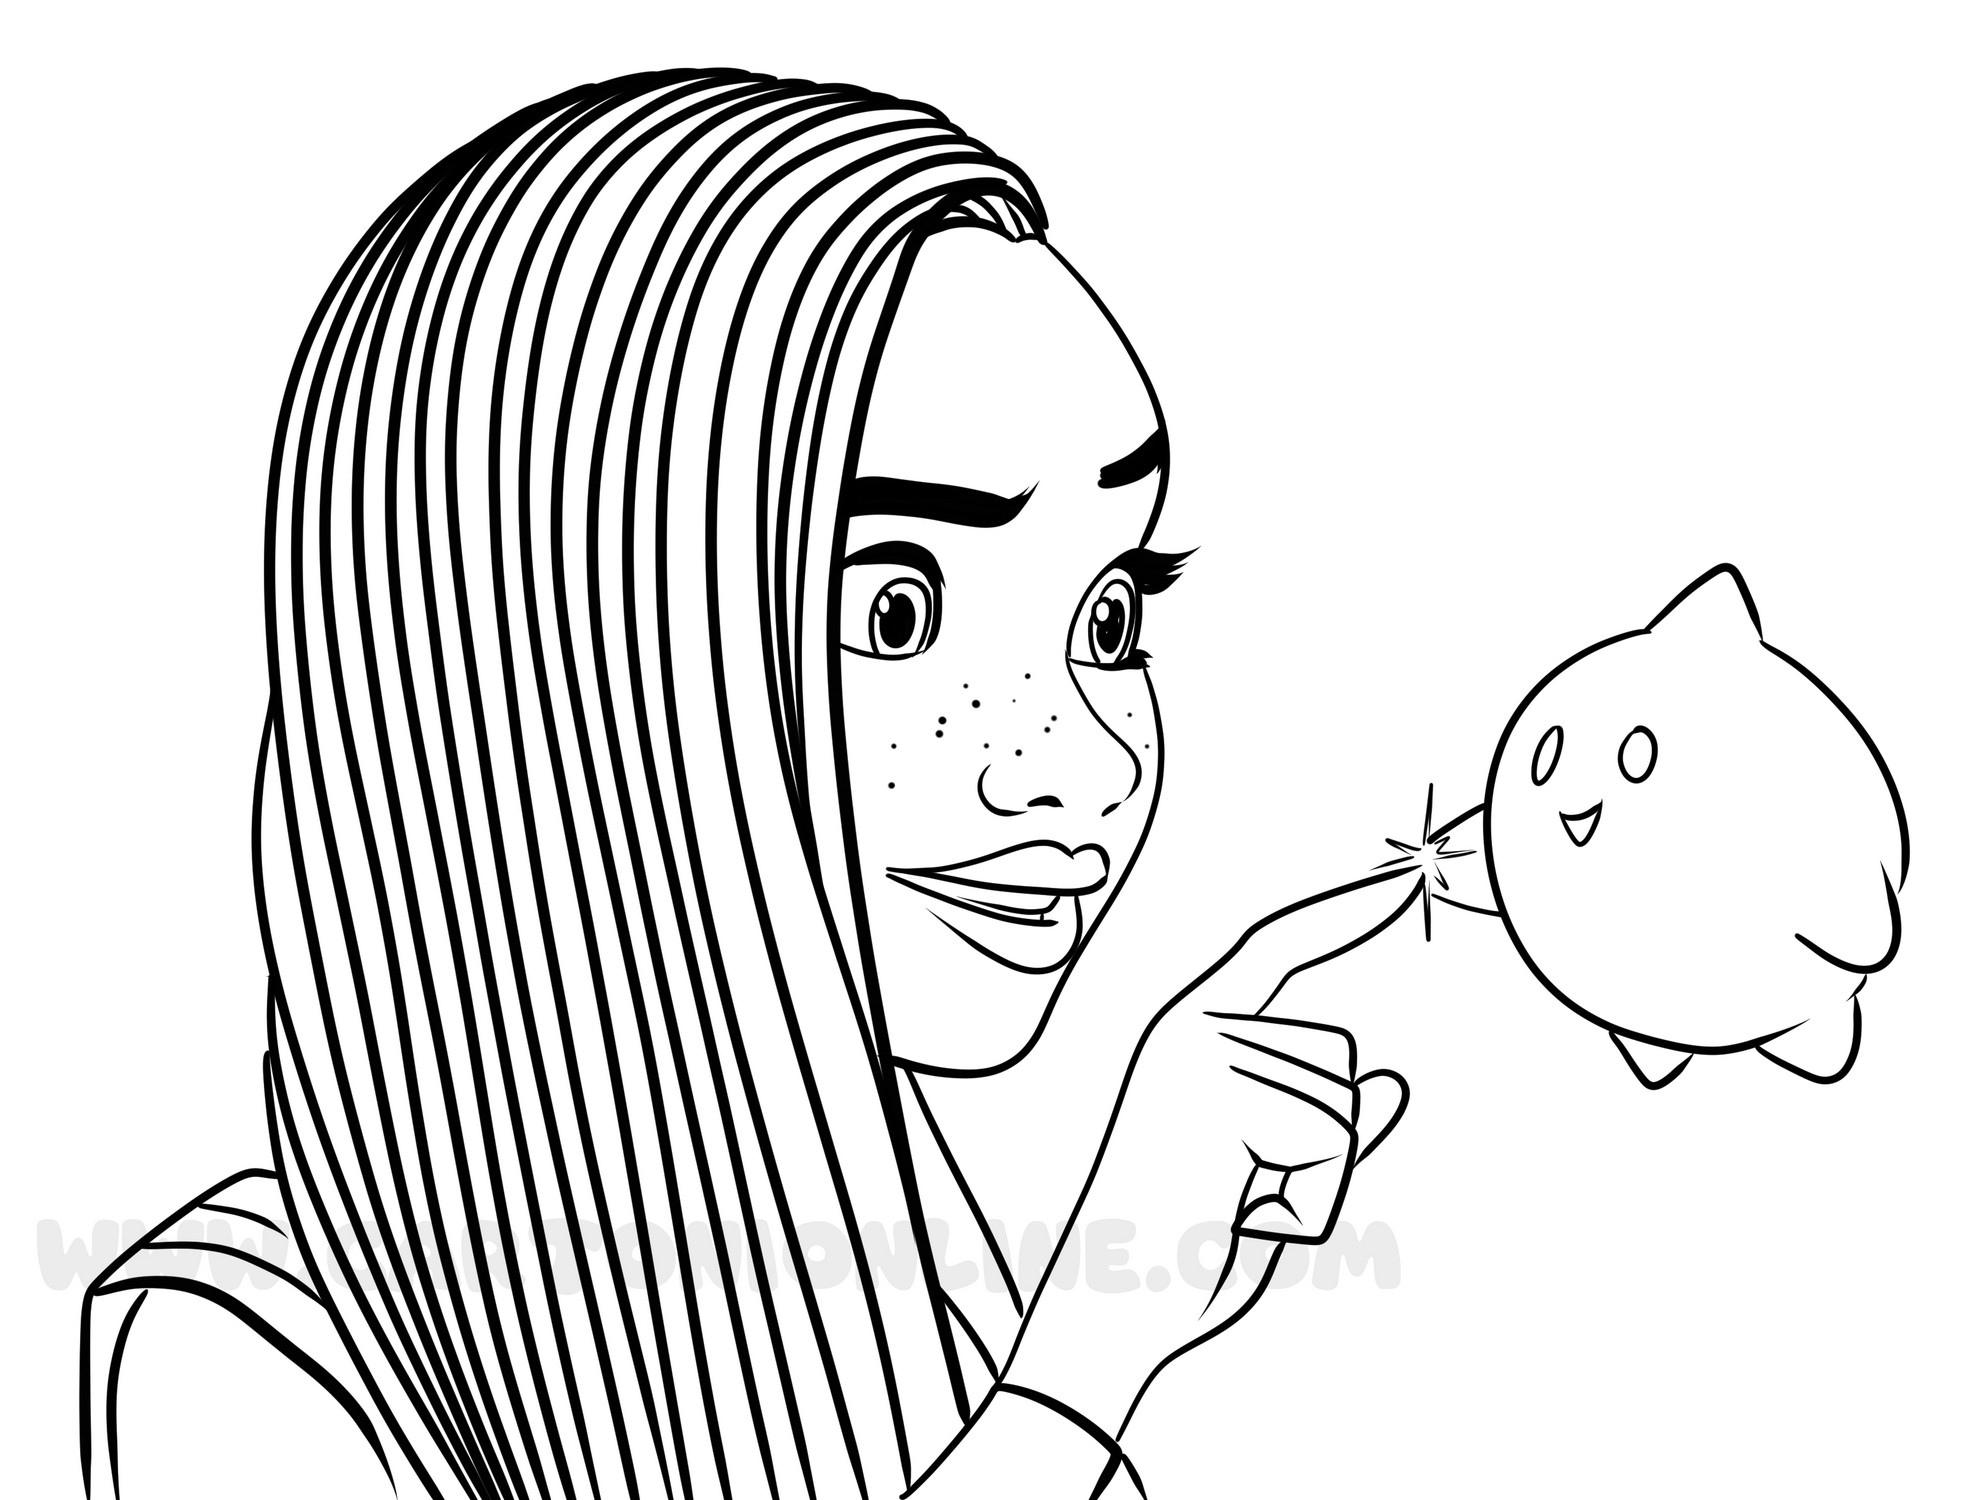 Asha 05 from Wish (Disney) coloring page to print and coloring